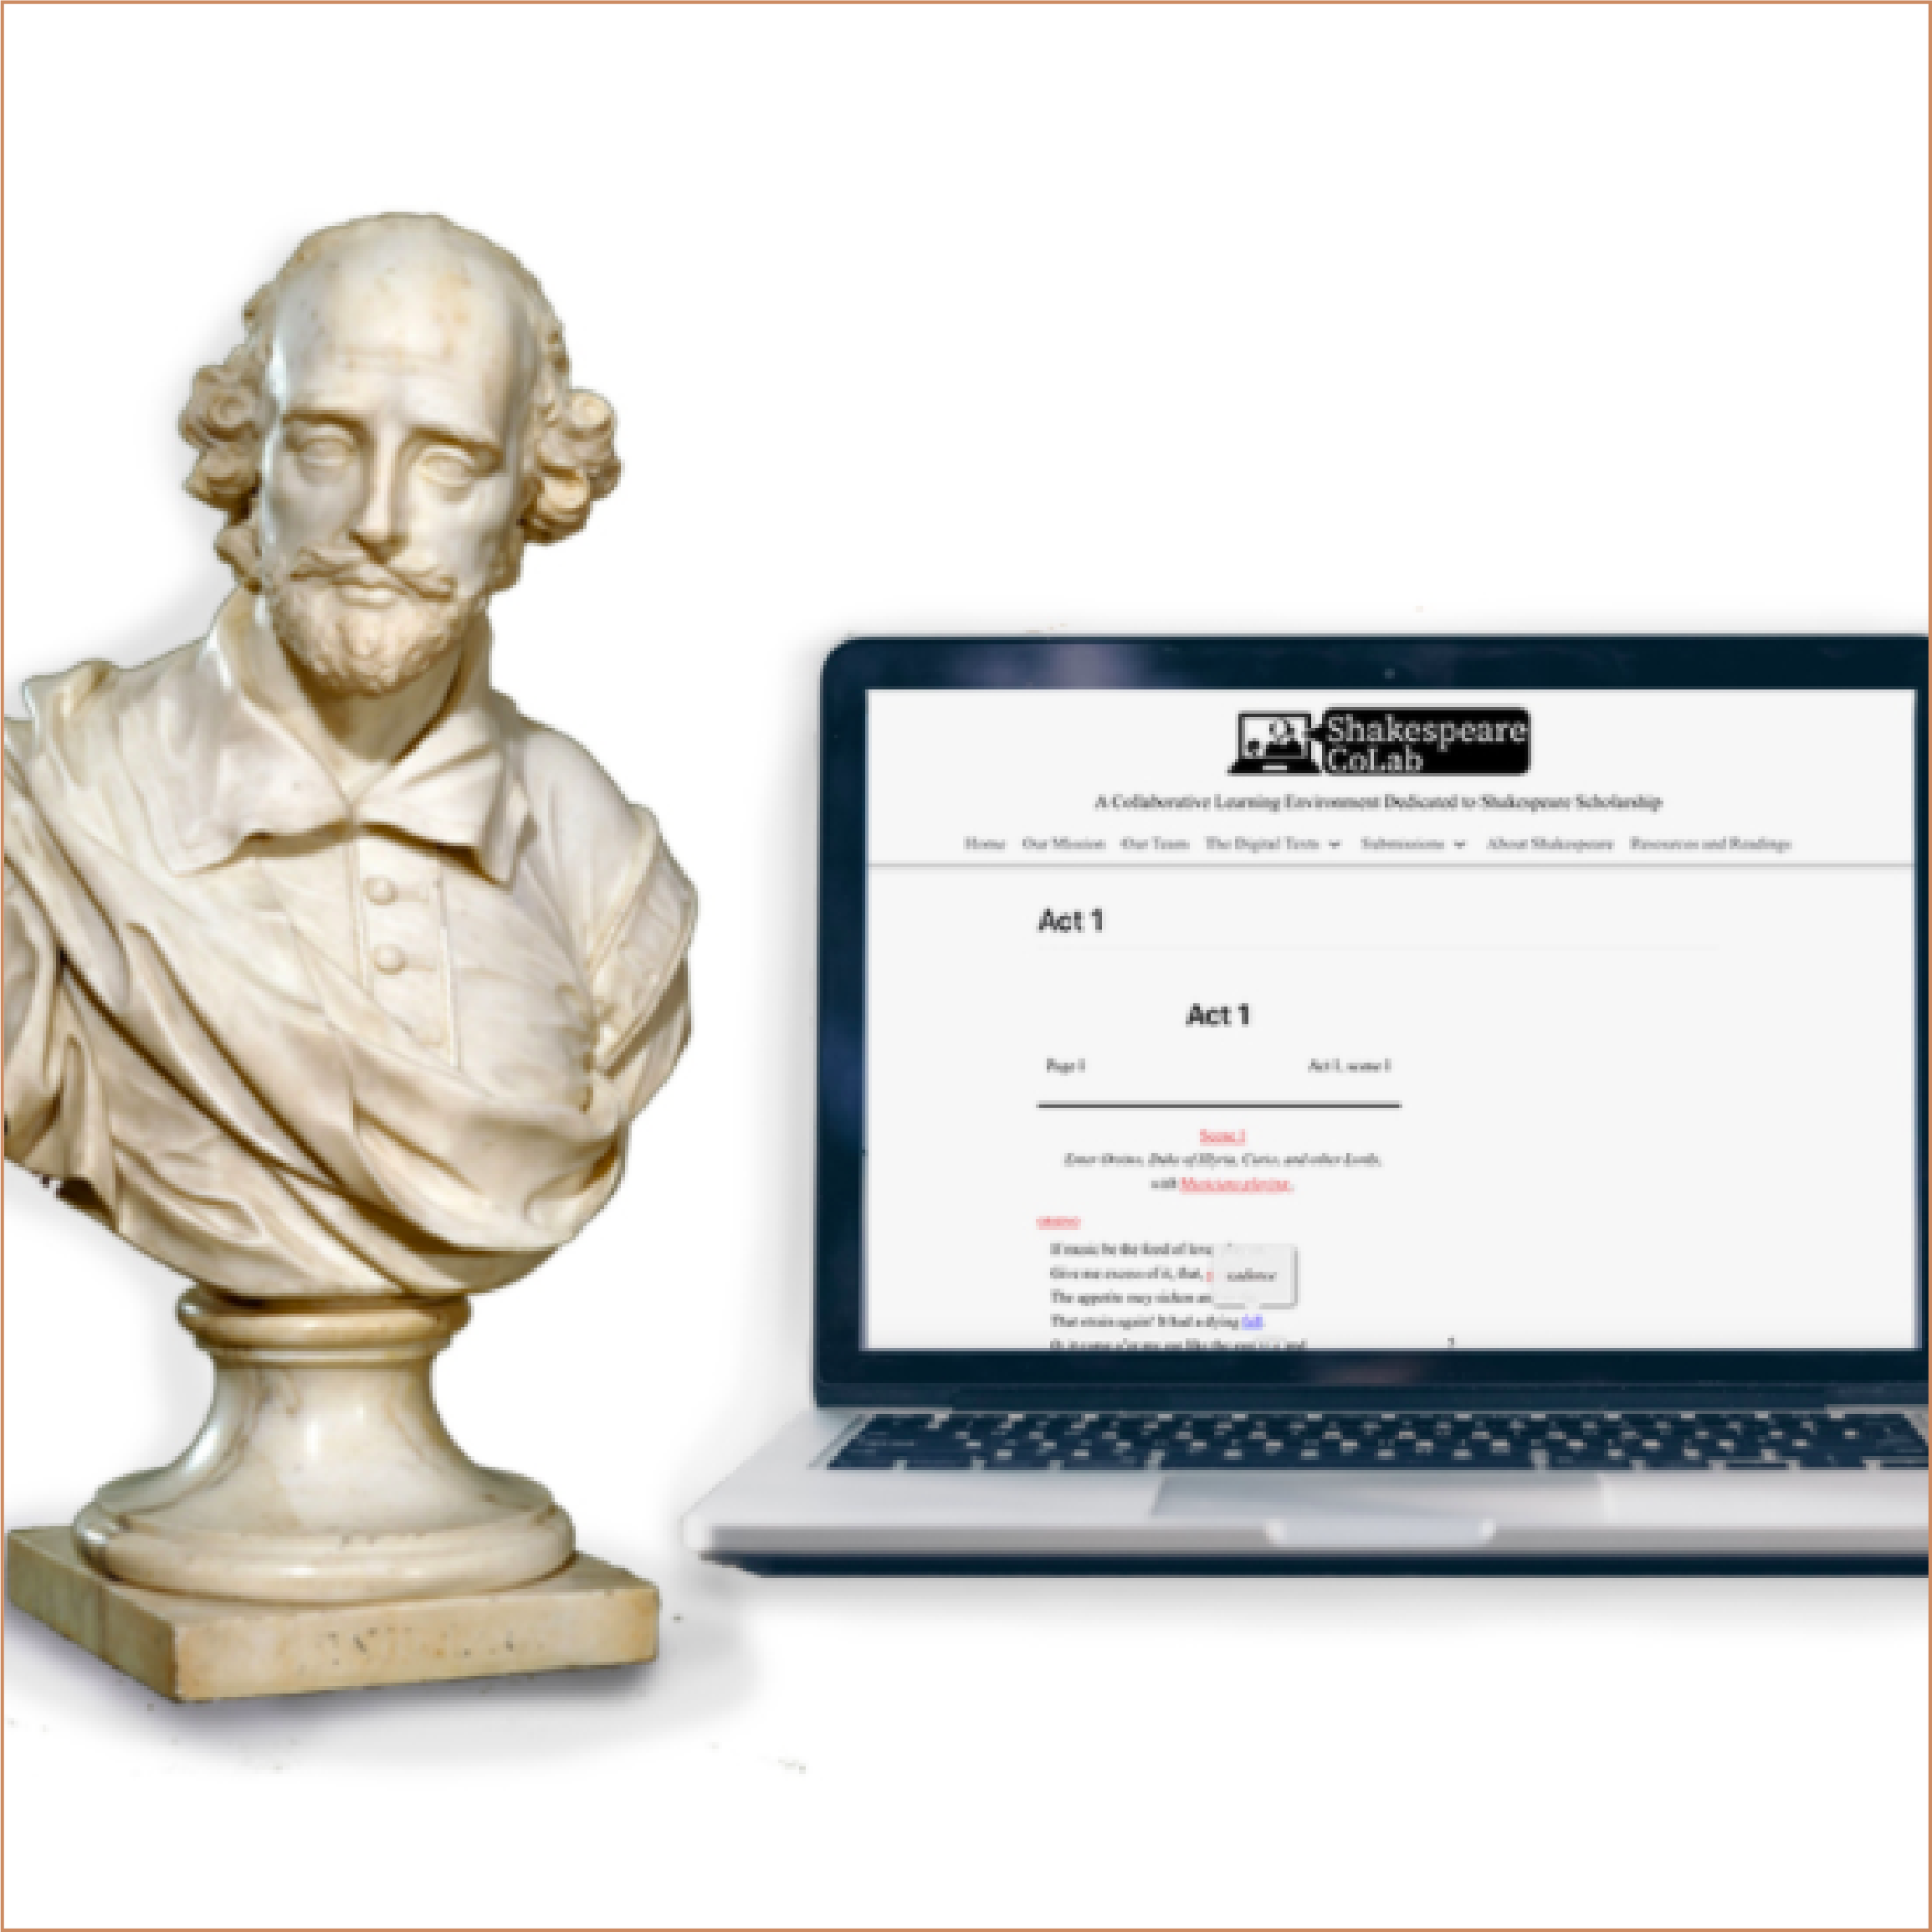 Link to Shakespeare CoLab Website